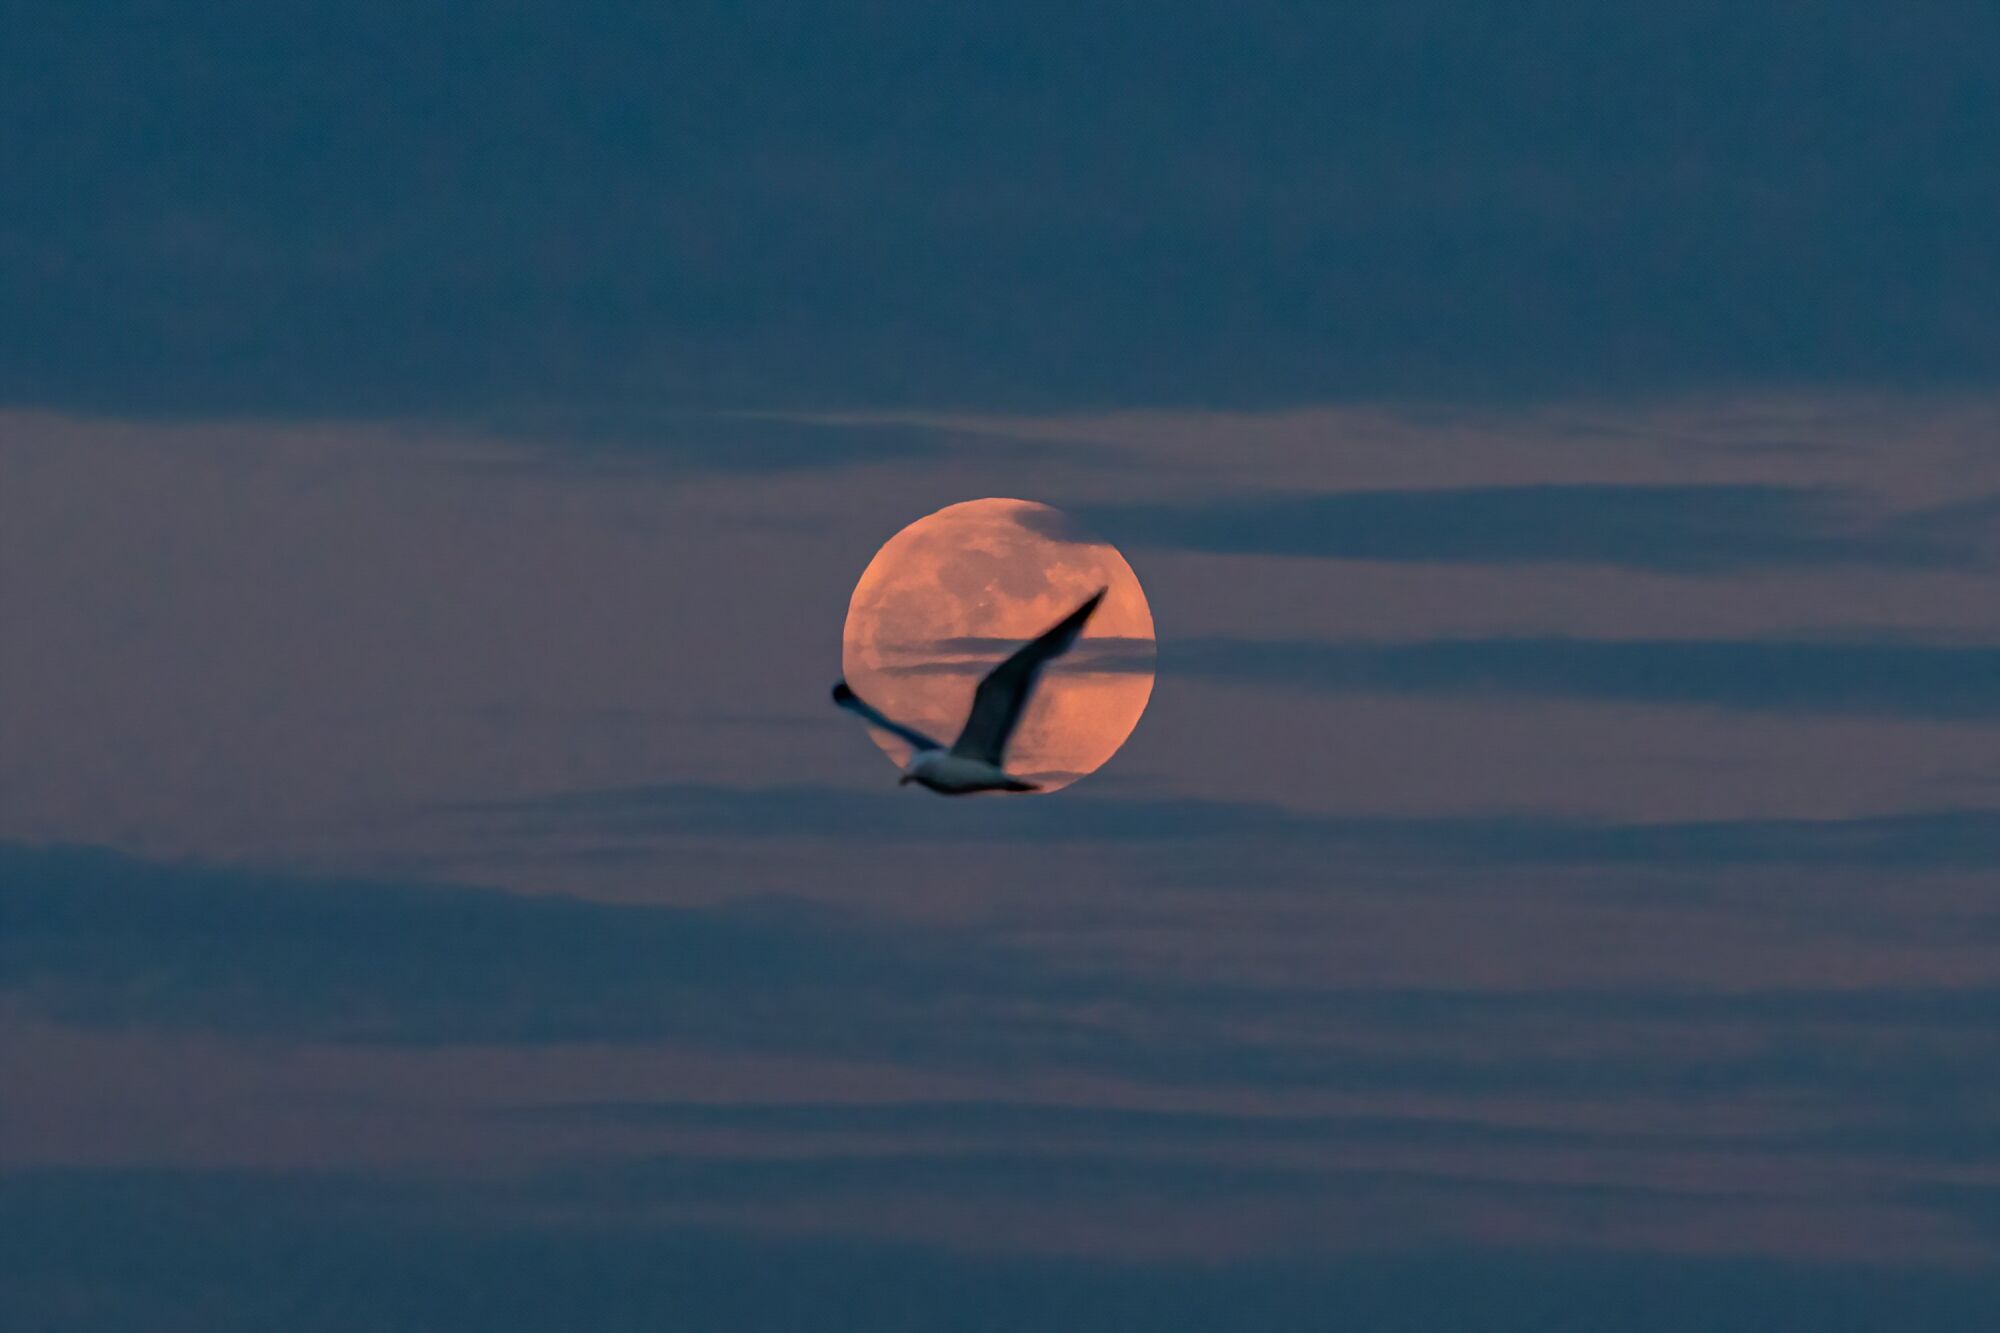 A seagull flies in front of a full lunar eclipse.